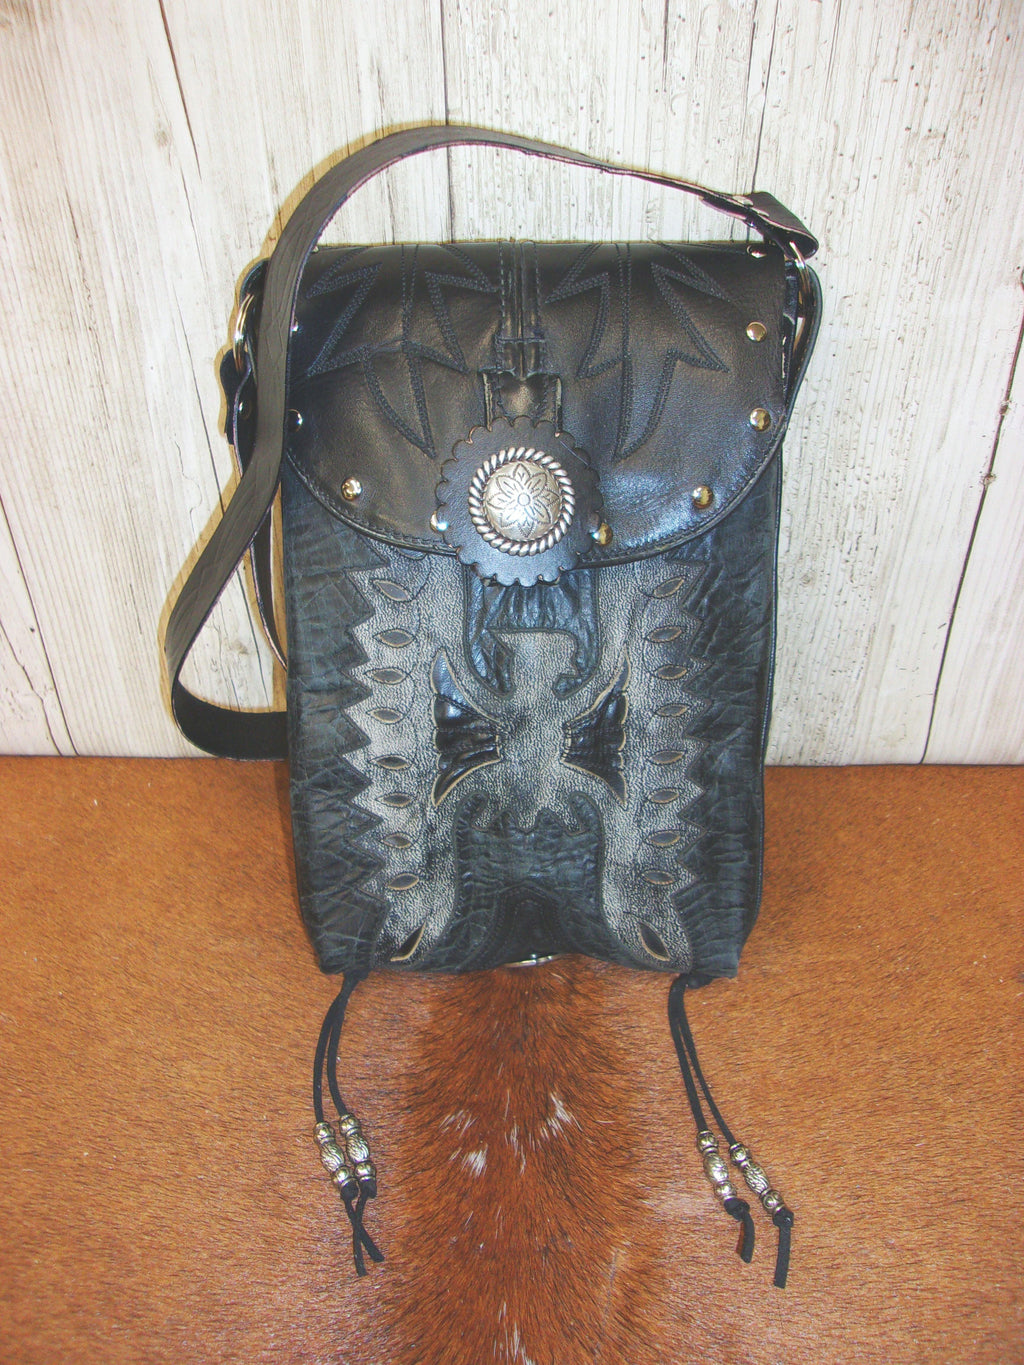 Cowboy Boot Concealed Carry Purse - Crossbody Conceal Carry Purse CB157 cowboy boot purses, western fringe purse, handmade leather purses, boot purse, handmade western purse, custom leather handbags Chris Thompson Bags